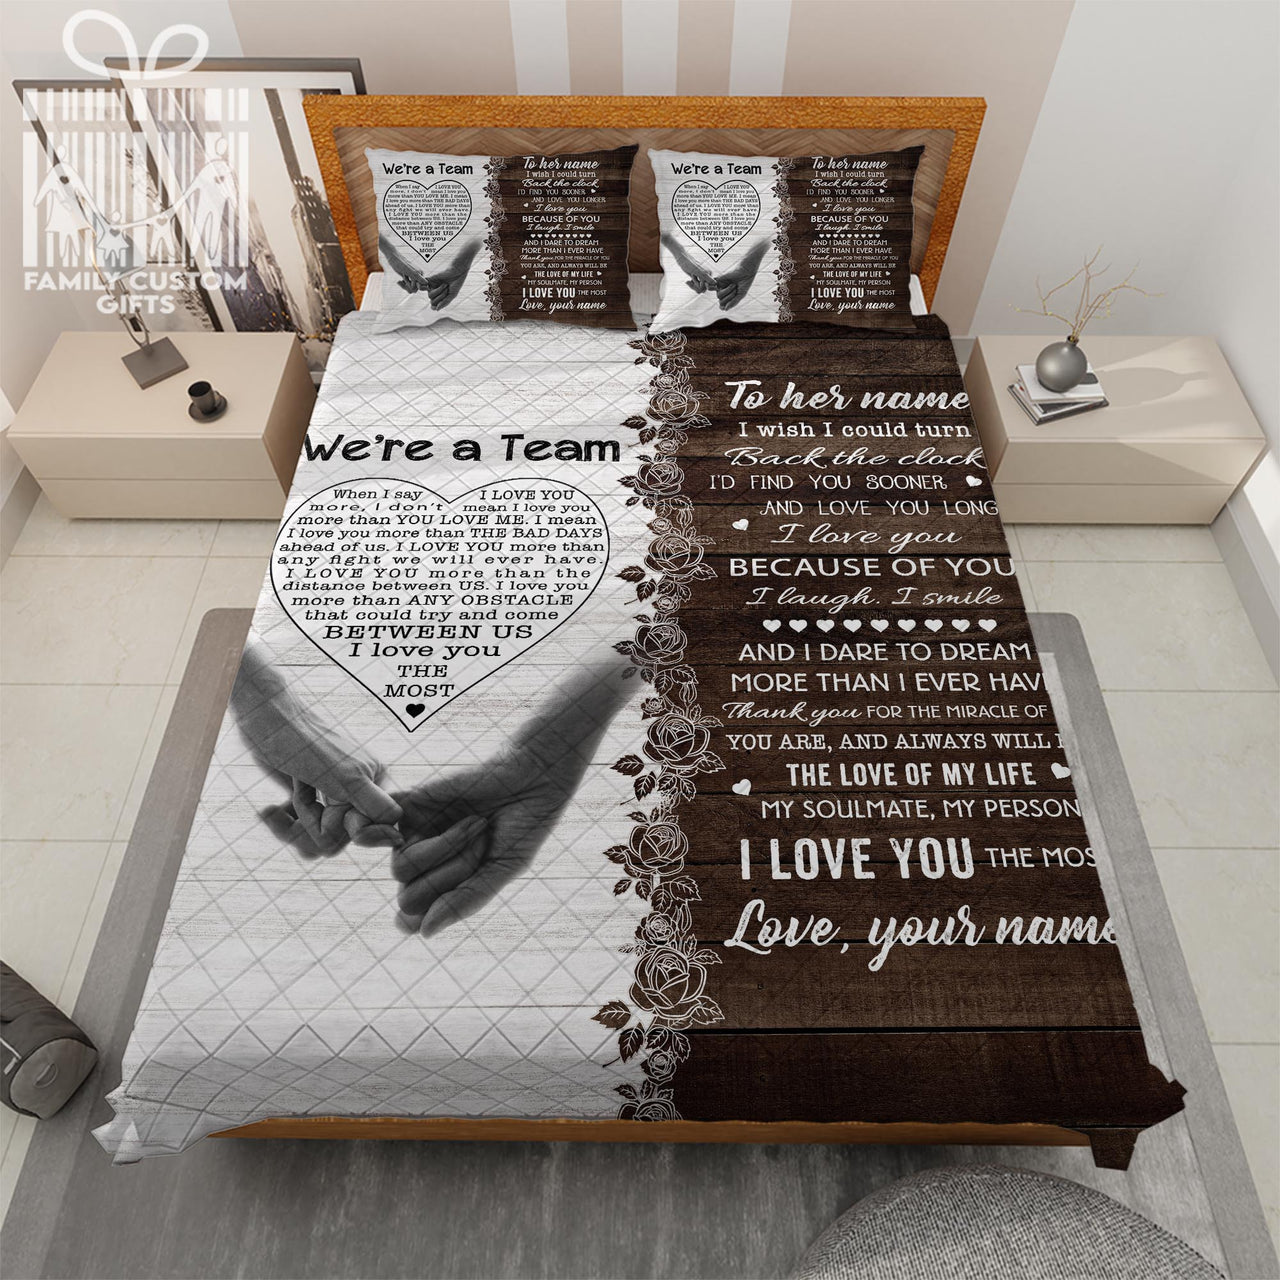 Custom Quilt Sets for Couple We're Are A Team Personalized Quilt Bedding for Her Him - Anniversary Gift